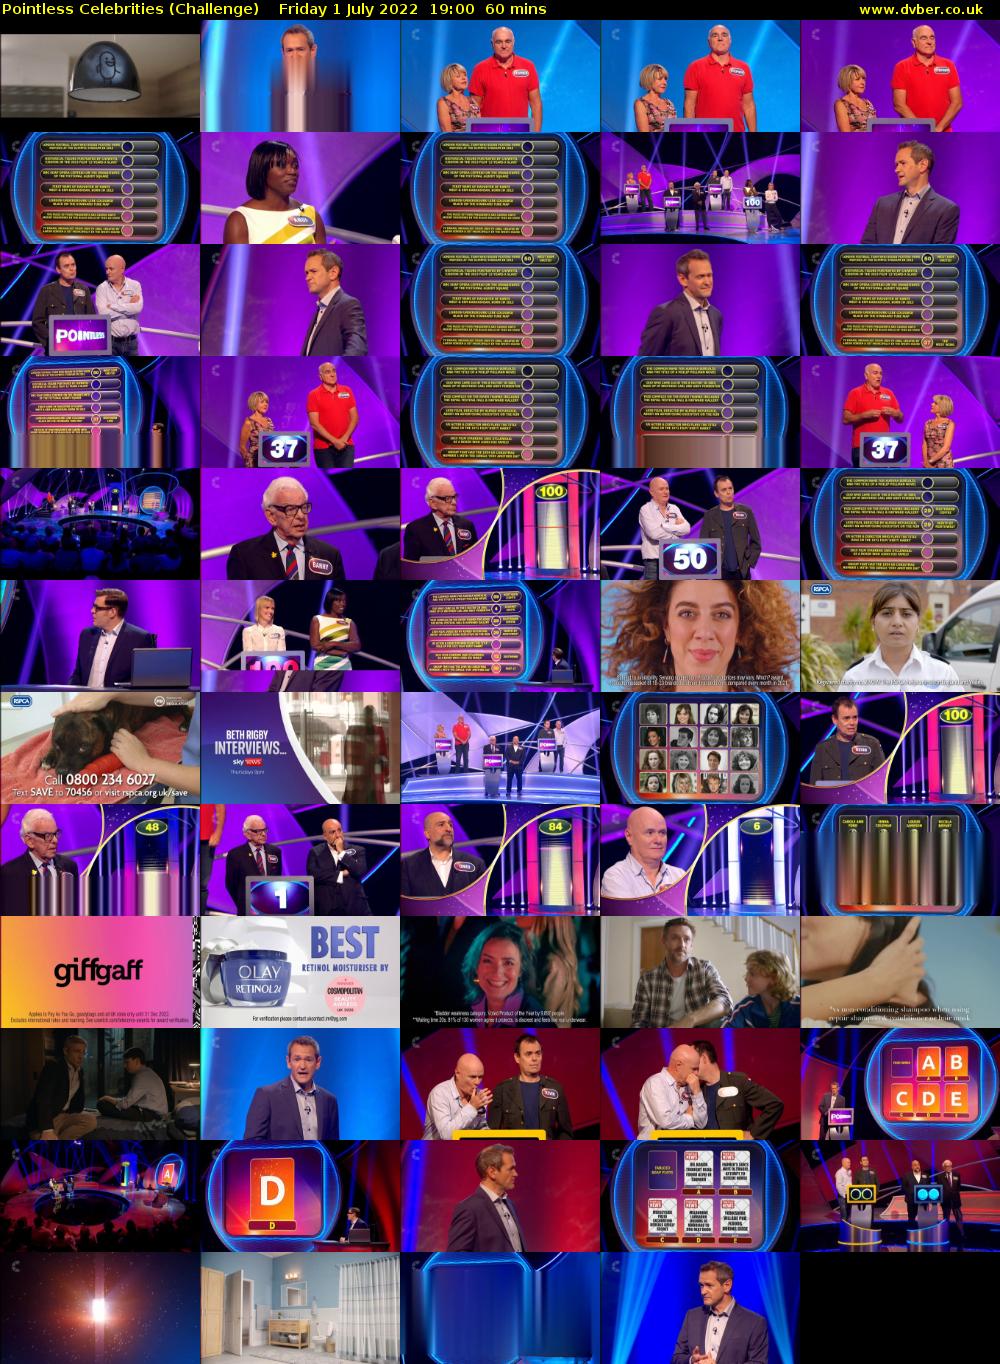 Pointless Celebrities (Challenge) Friday 1 July 2022 19:00 - 20:00